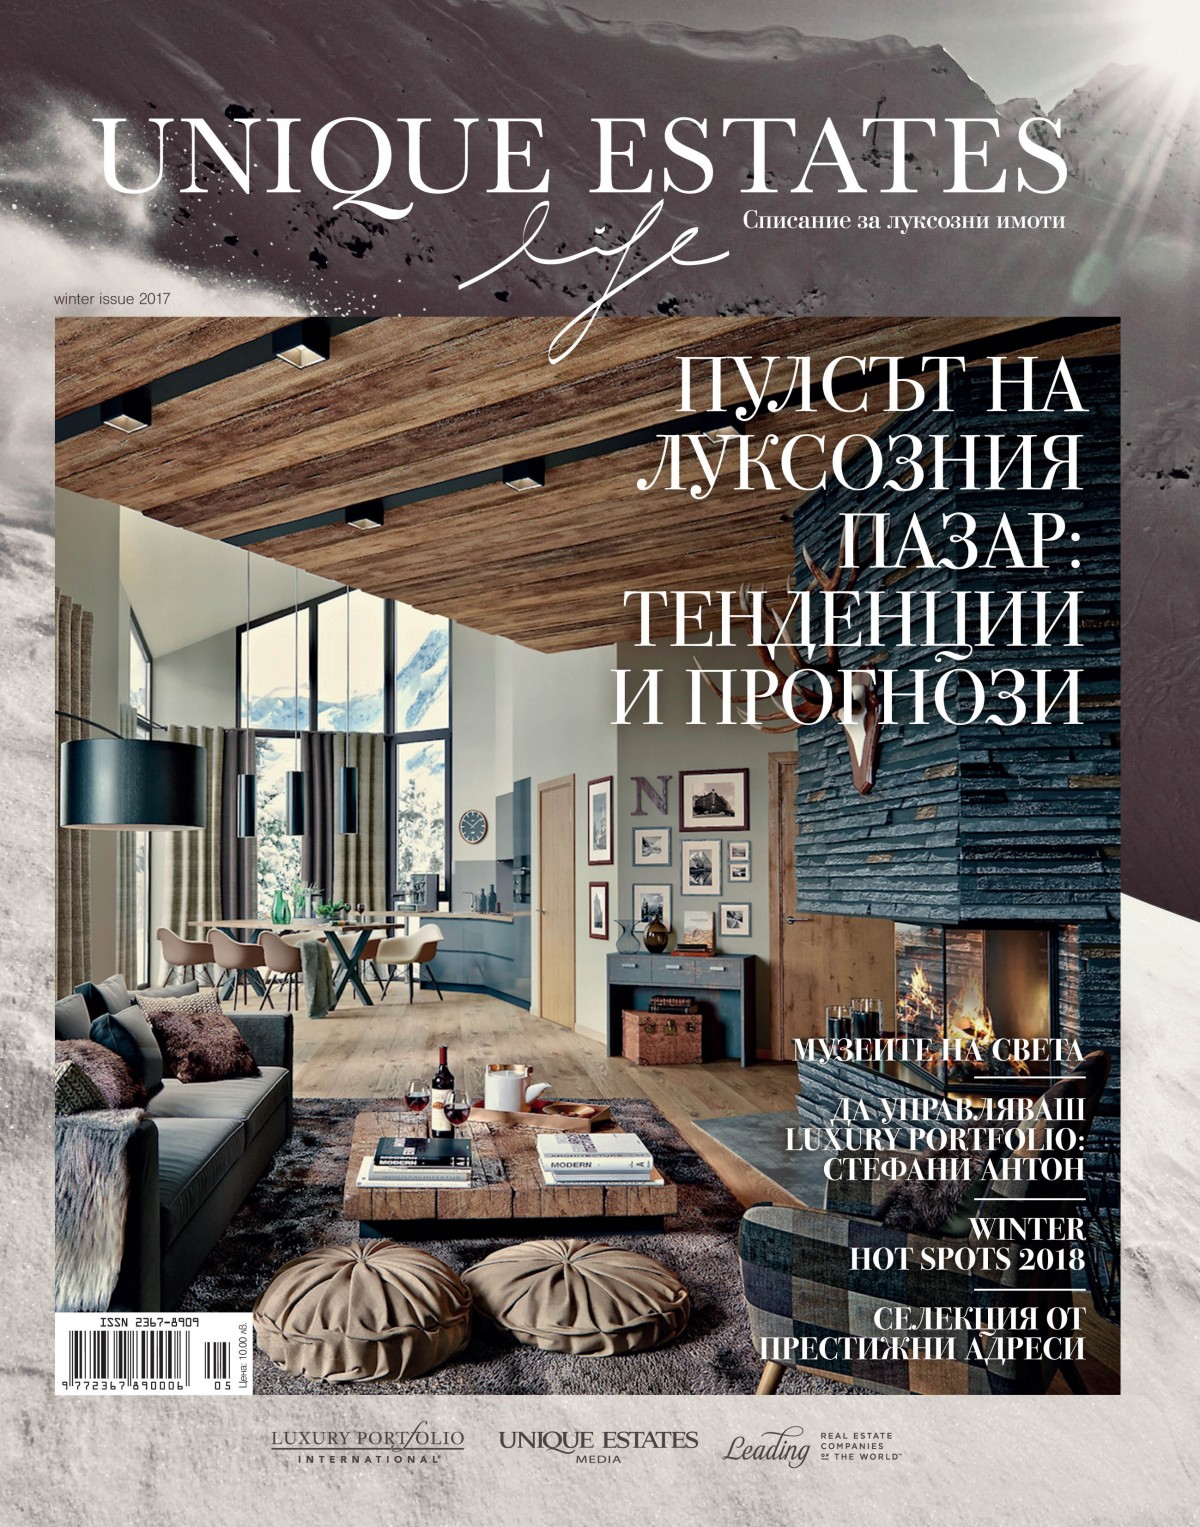 The new issue of Unique Estates Life Magazine is here! - image 2